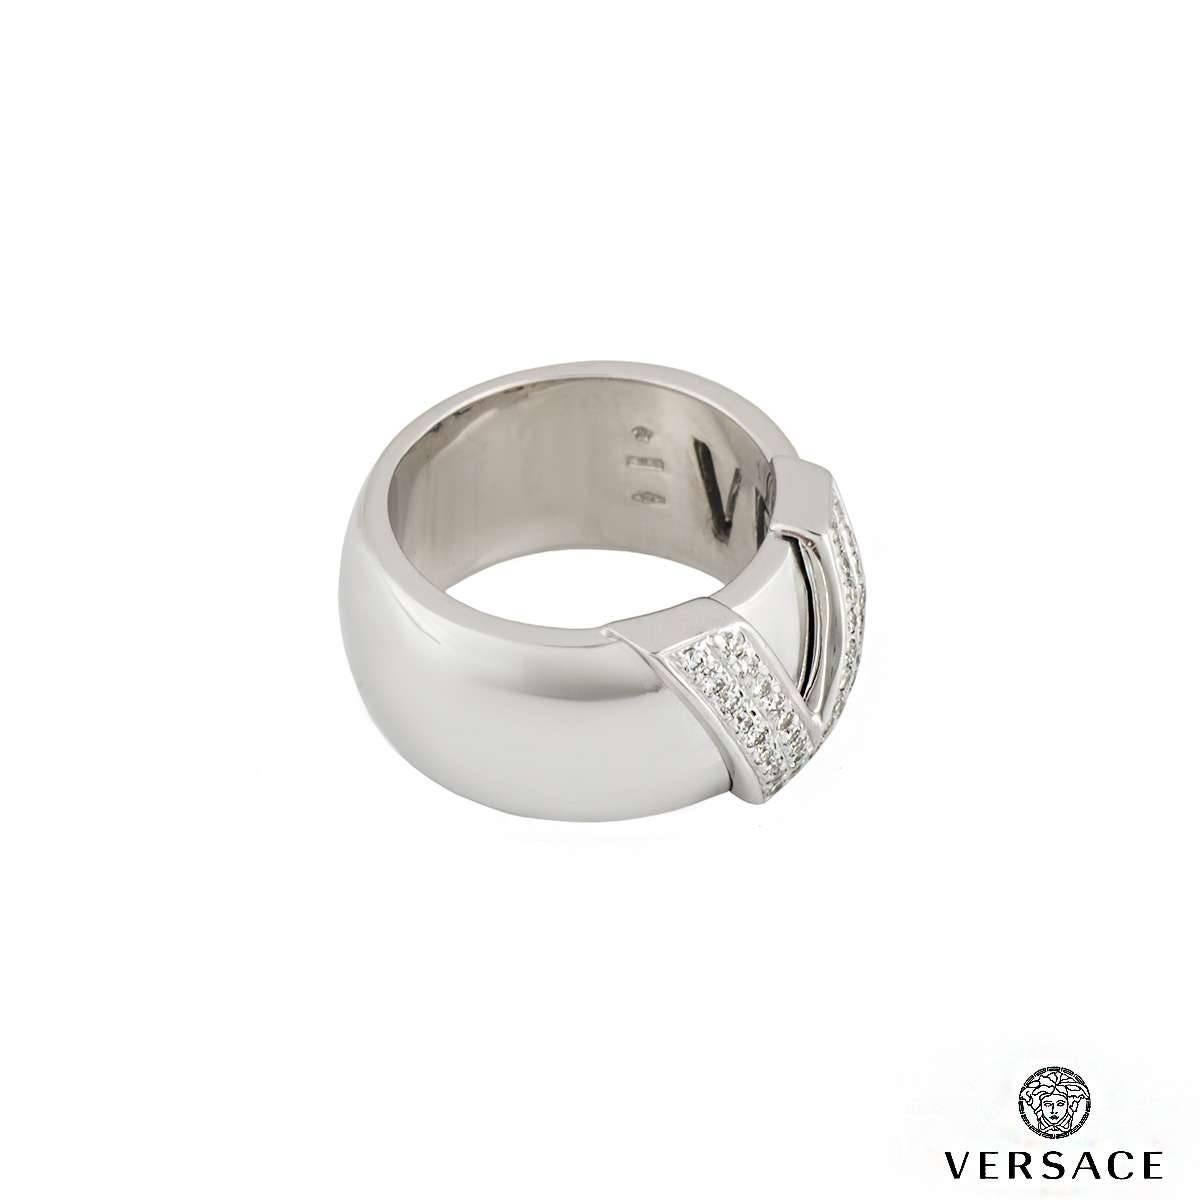 A 18k white gold Versace mens ring. The ring comprises of a V motif with 36 round brilliant cut diamonds in a pave setting with an approximate weight of 0.61ct, G colour and VS clarity. The ring is a D shape and measures 11mm in width. The ring is a